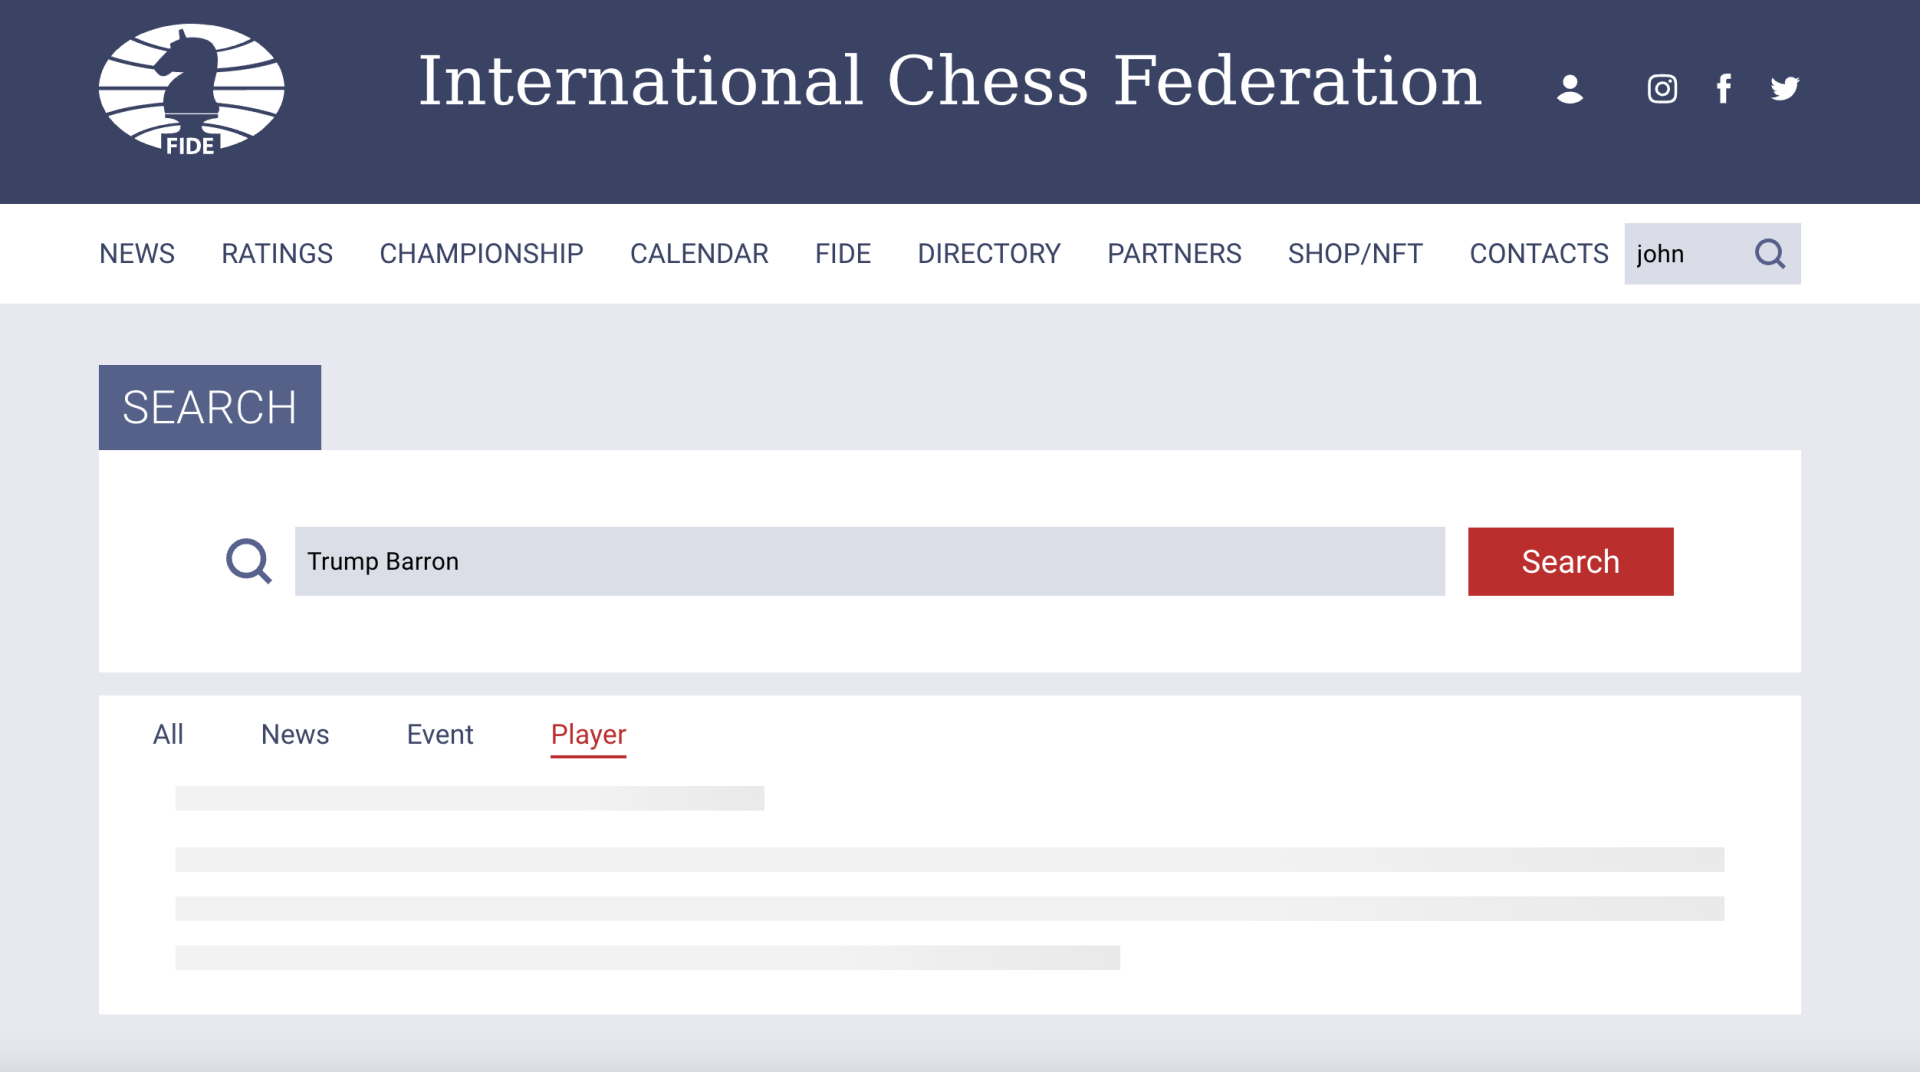 International chess federation webpage searching for the name "Trump Barron"